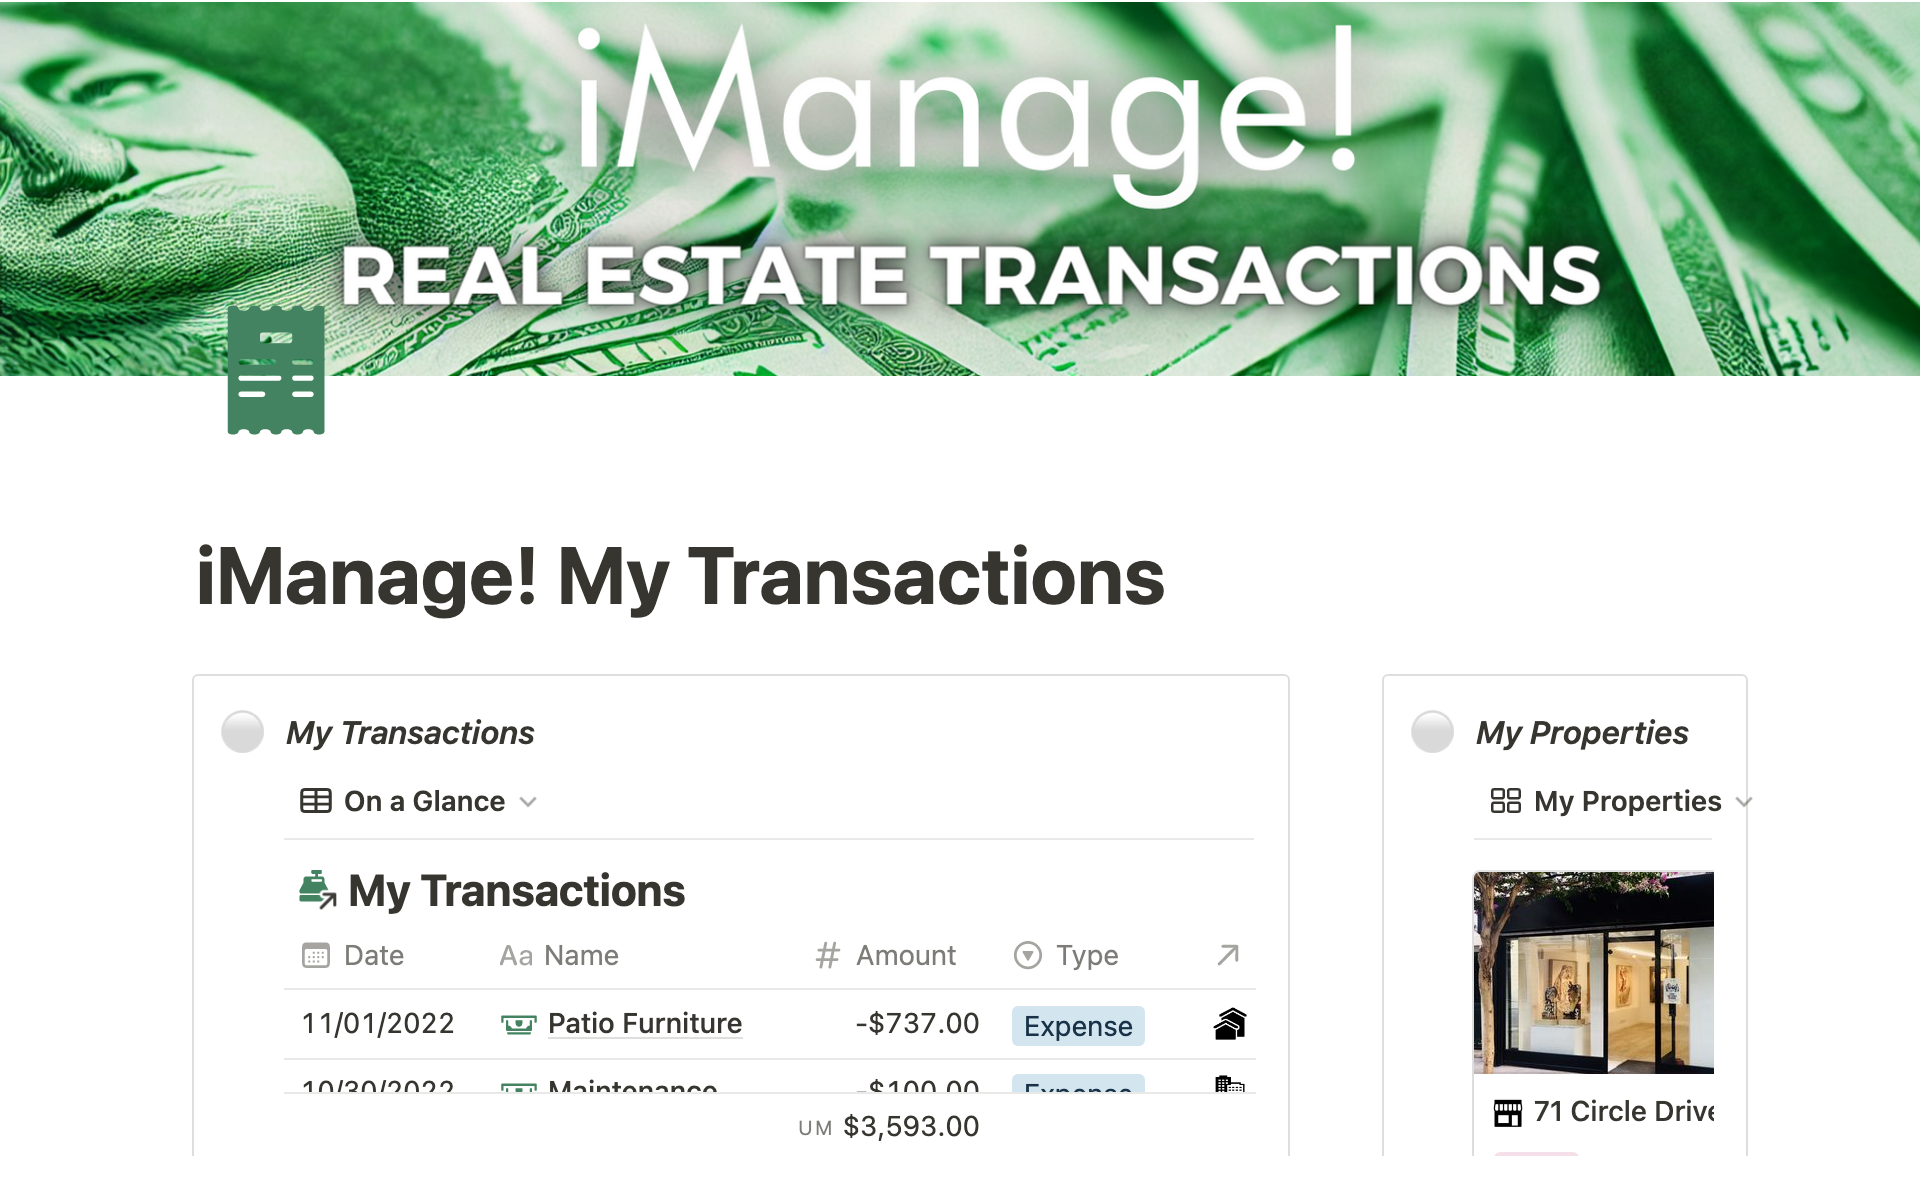 Track and manage your real estate finances and transactions.